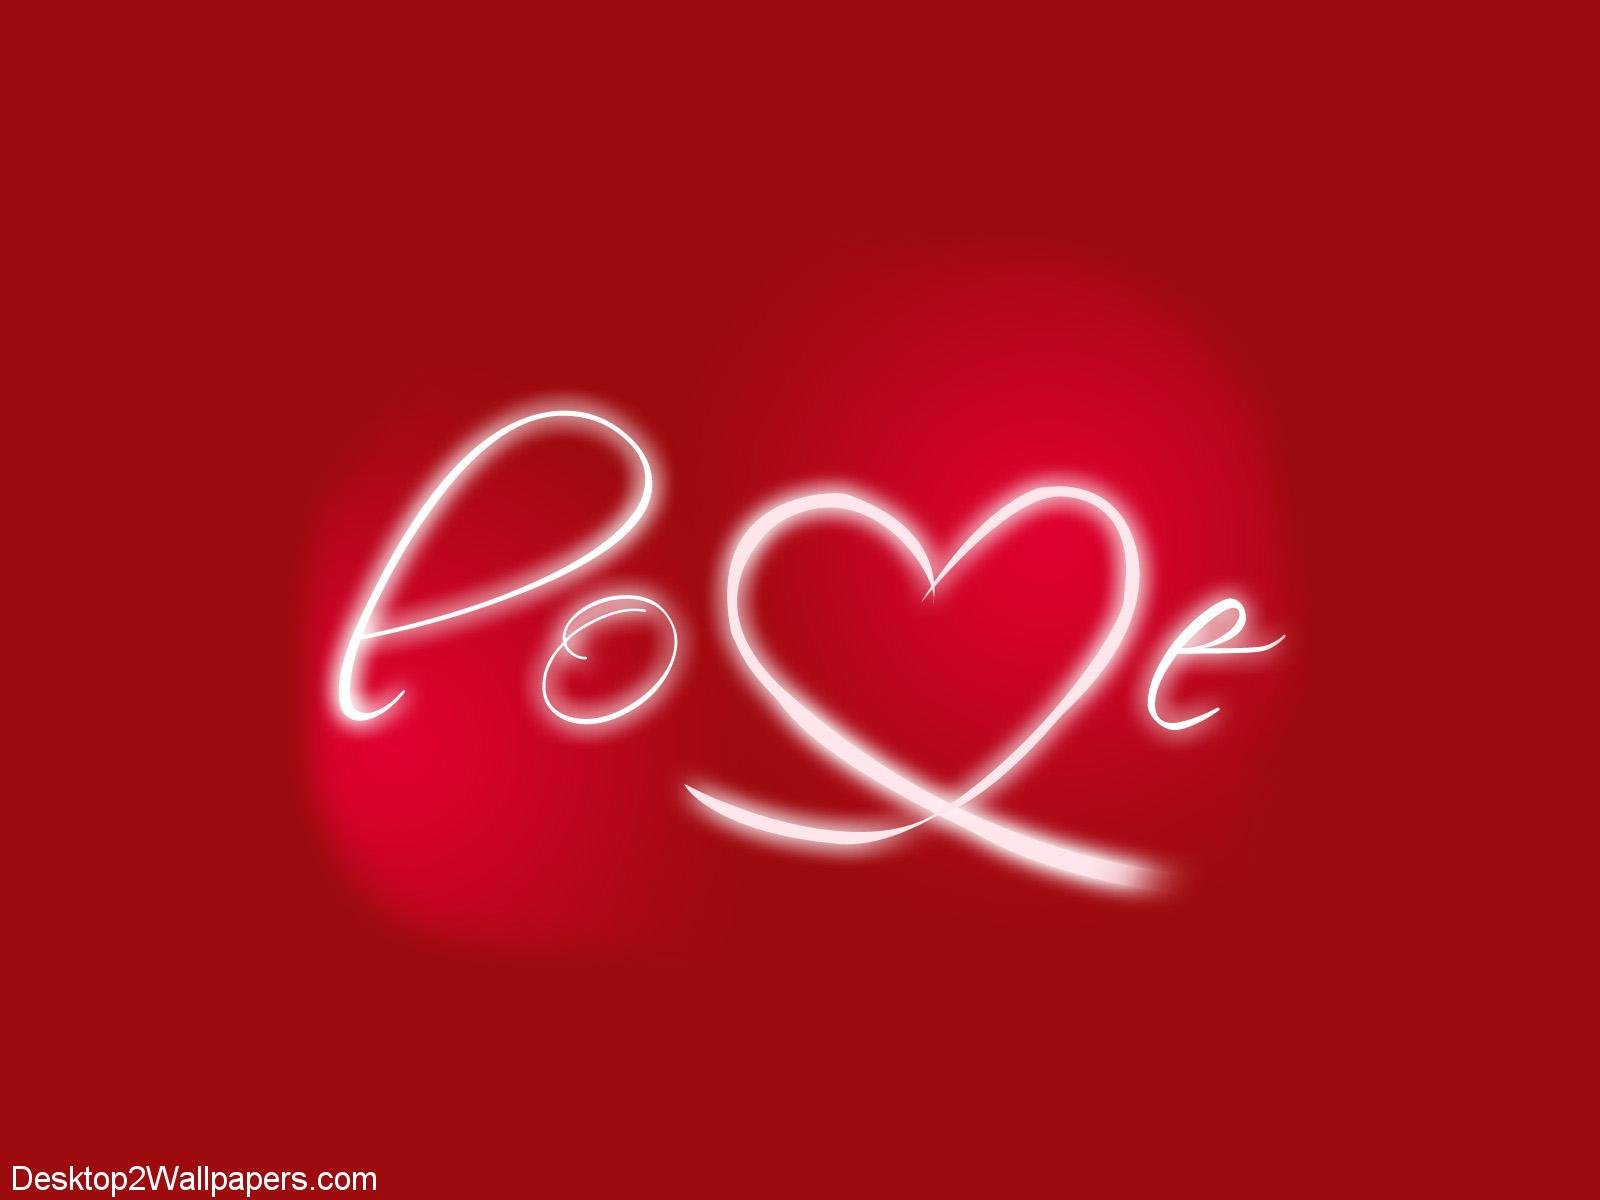 Red Heart Wallpaper 10282 Hd Wallpapers in Love   Imagescicom